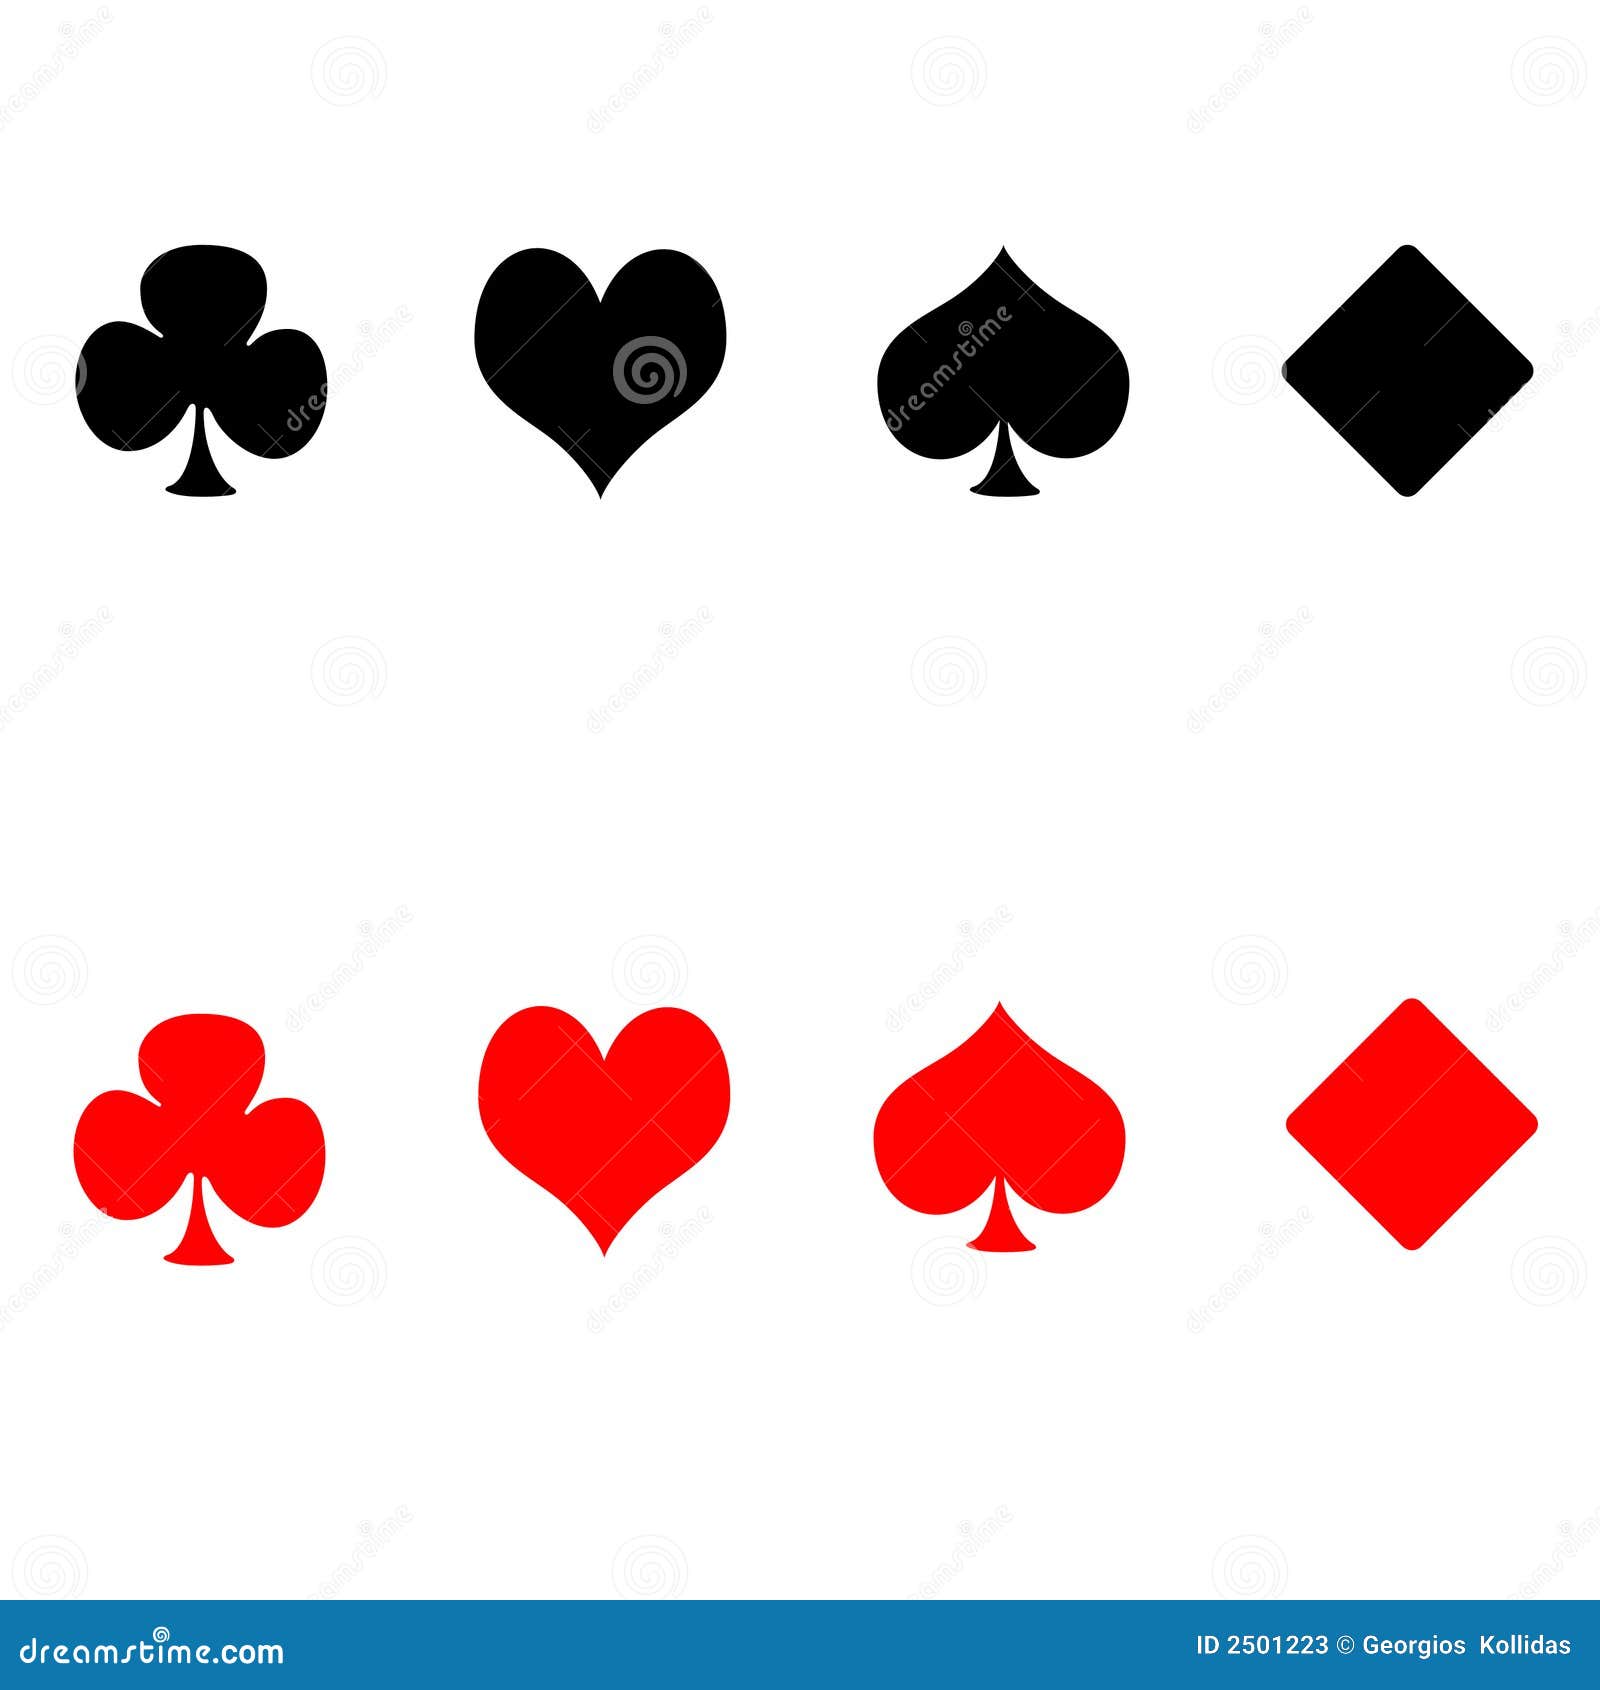 free clip art borders playing cards - photo #43